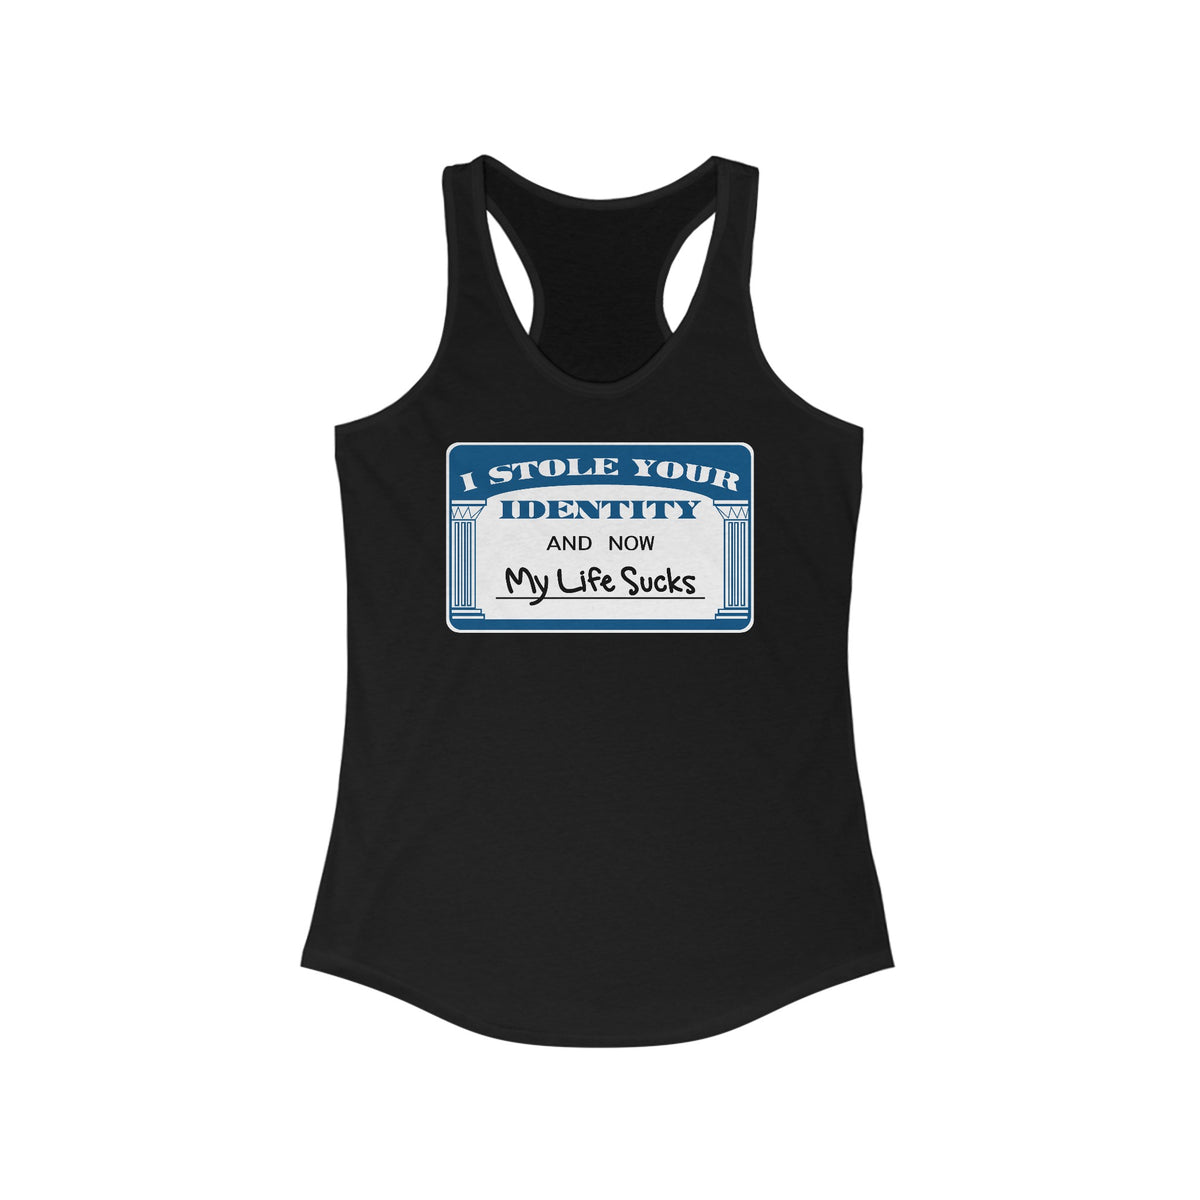 I Stole Your Identity And Now My Life Sucks -  Women’s Racerback Tank